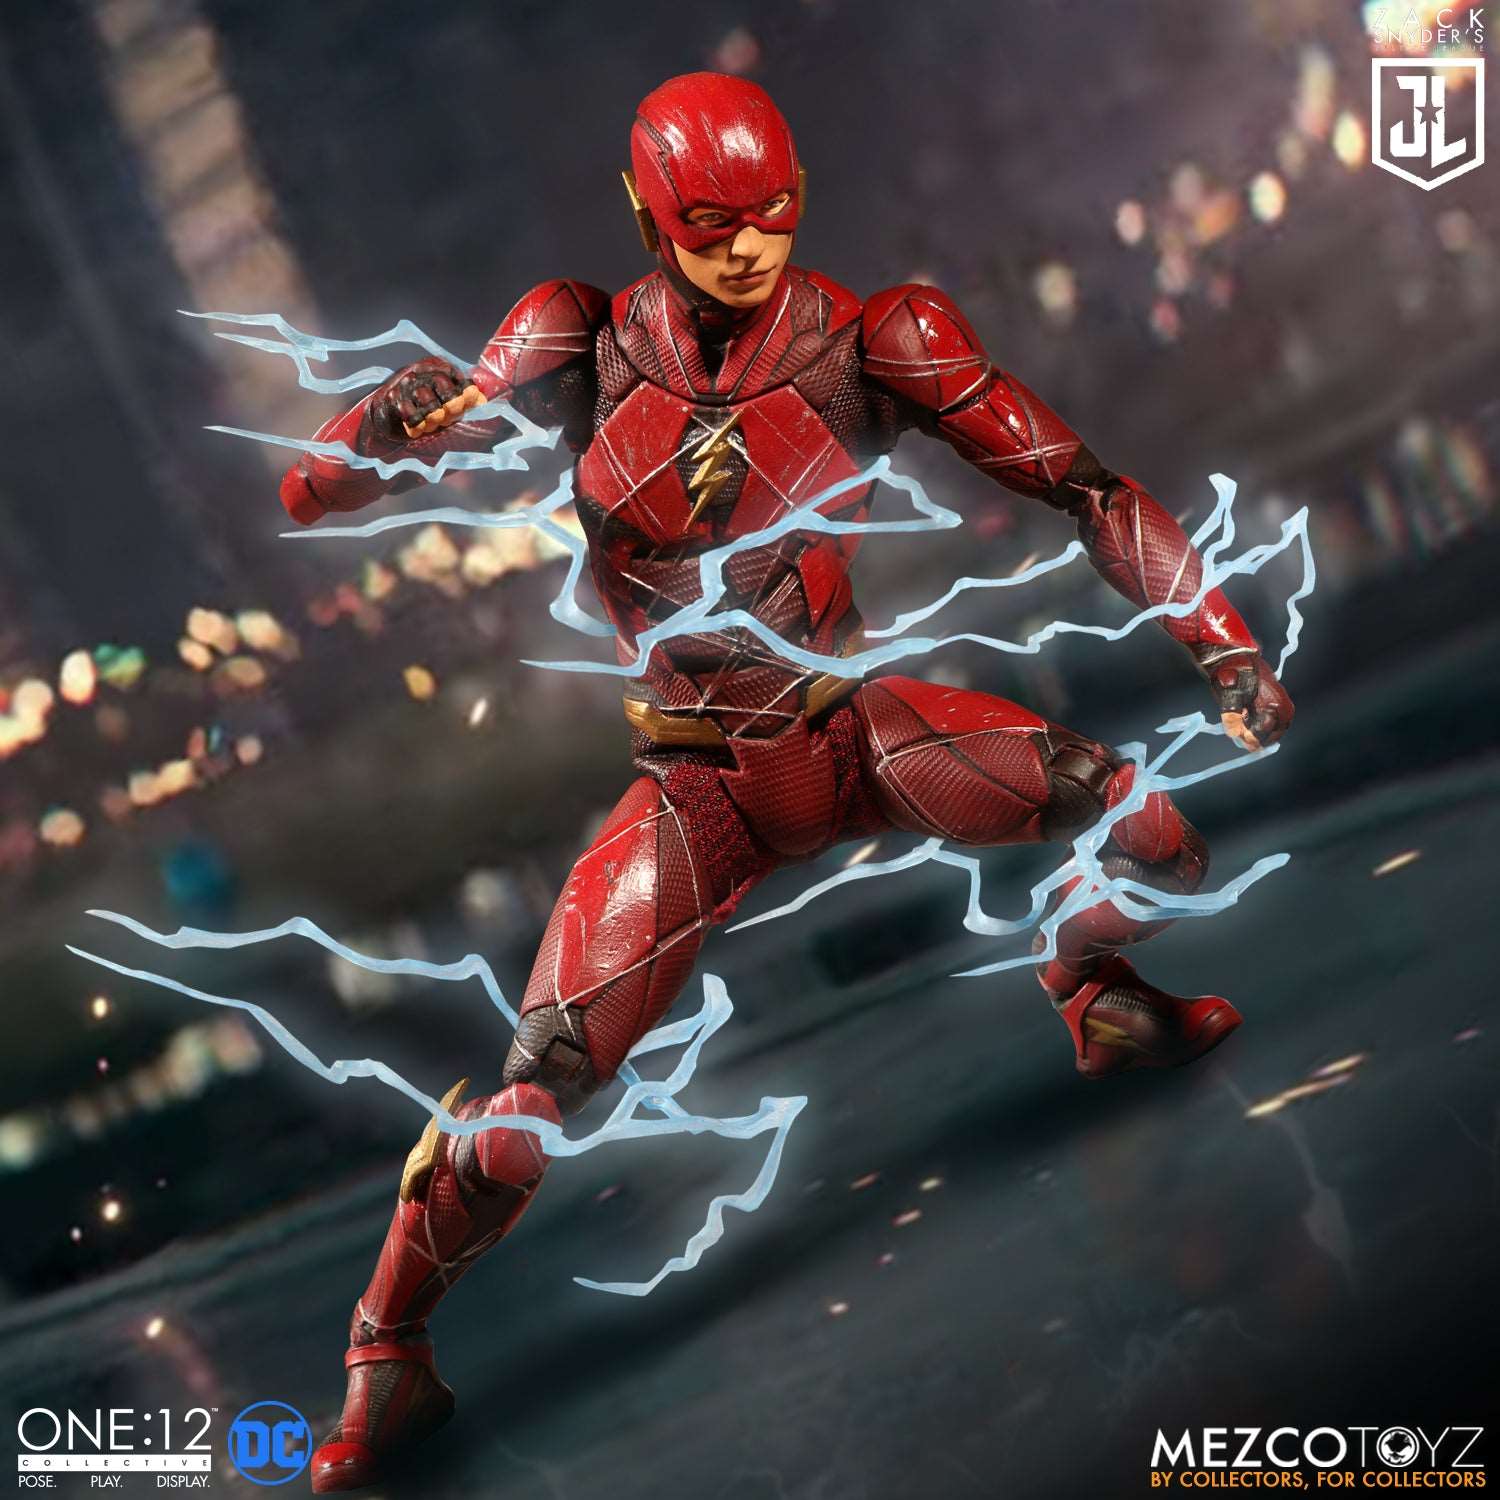 Mezco One Twelfth Collective Zack Snyder’s Justice League Deluxe Steel Boxed Set The Flash figure with Speed Force effects